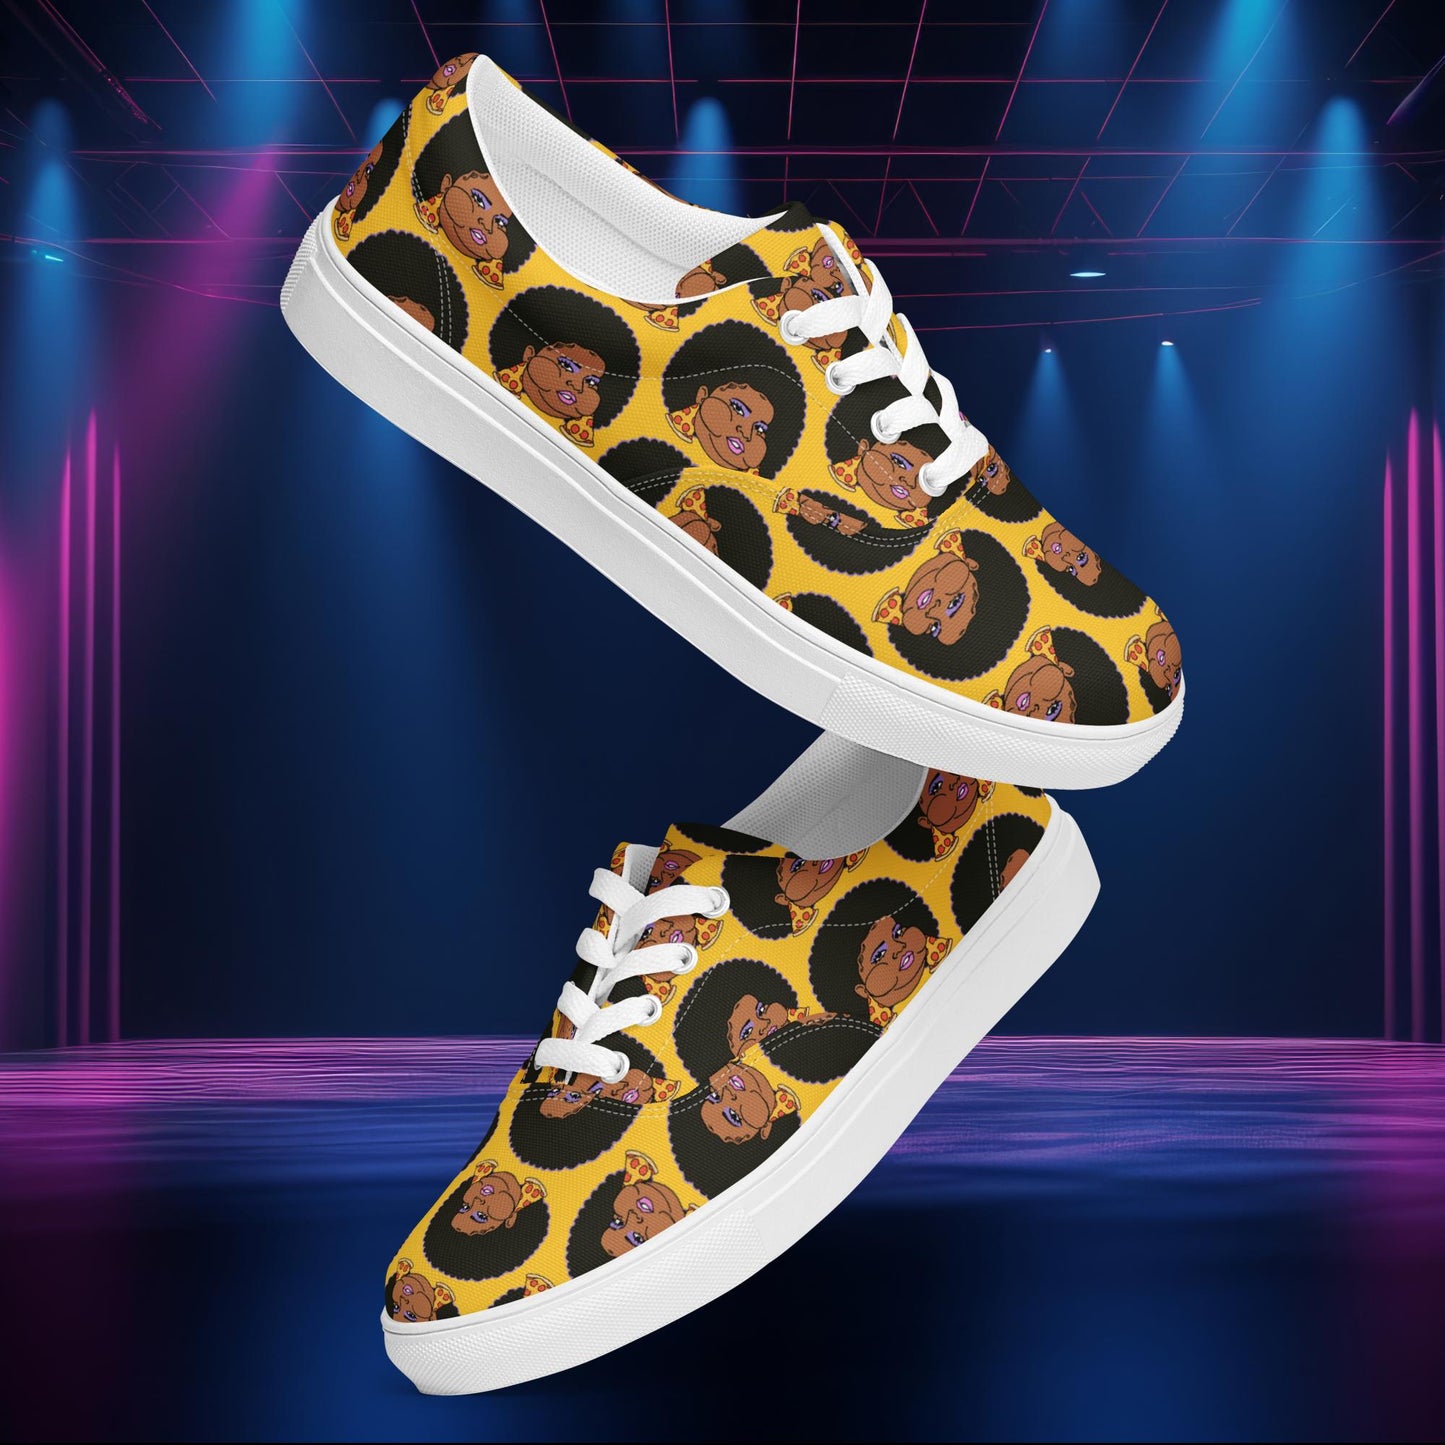 Pizzo Lizzo Pizza Lizzo Merch Lizzo Gift Song Lyrics Lizzo lace-up canvas shoes Next Cult Brand